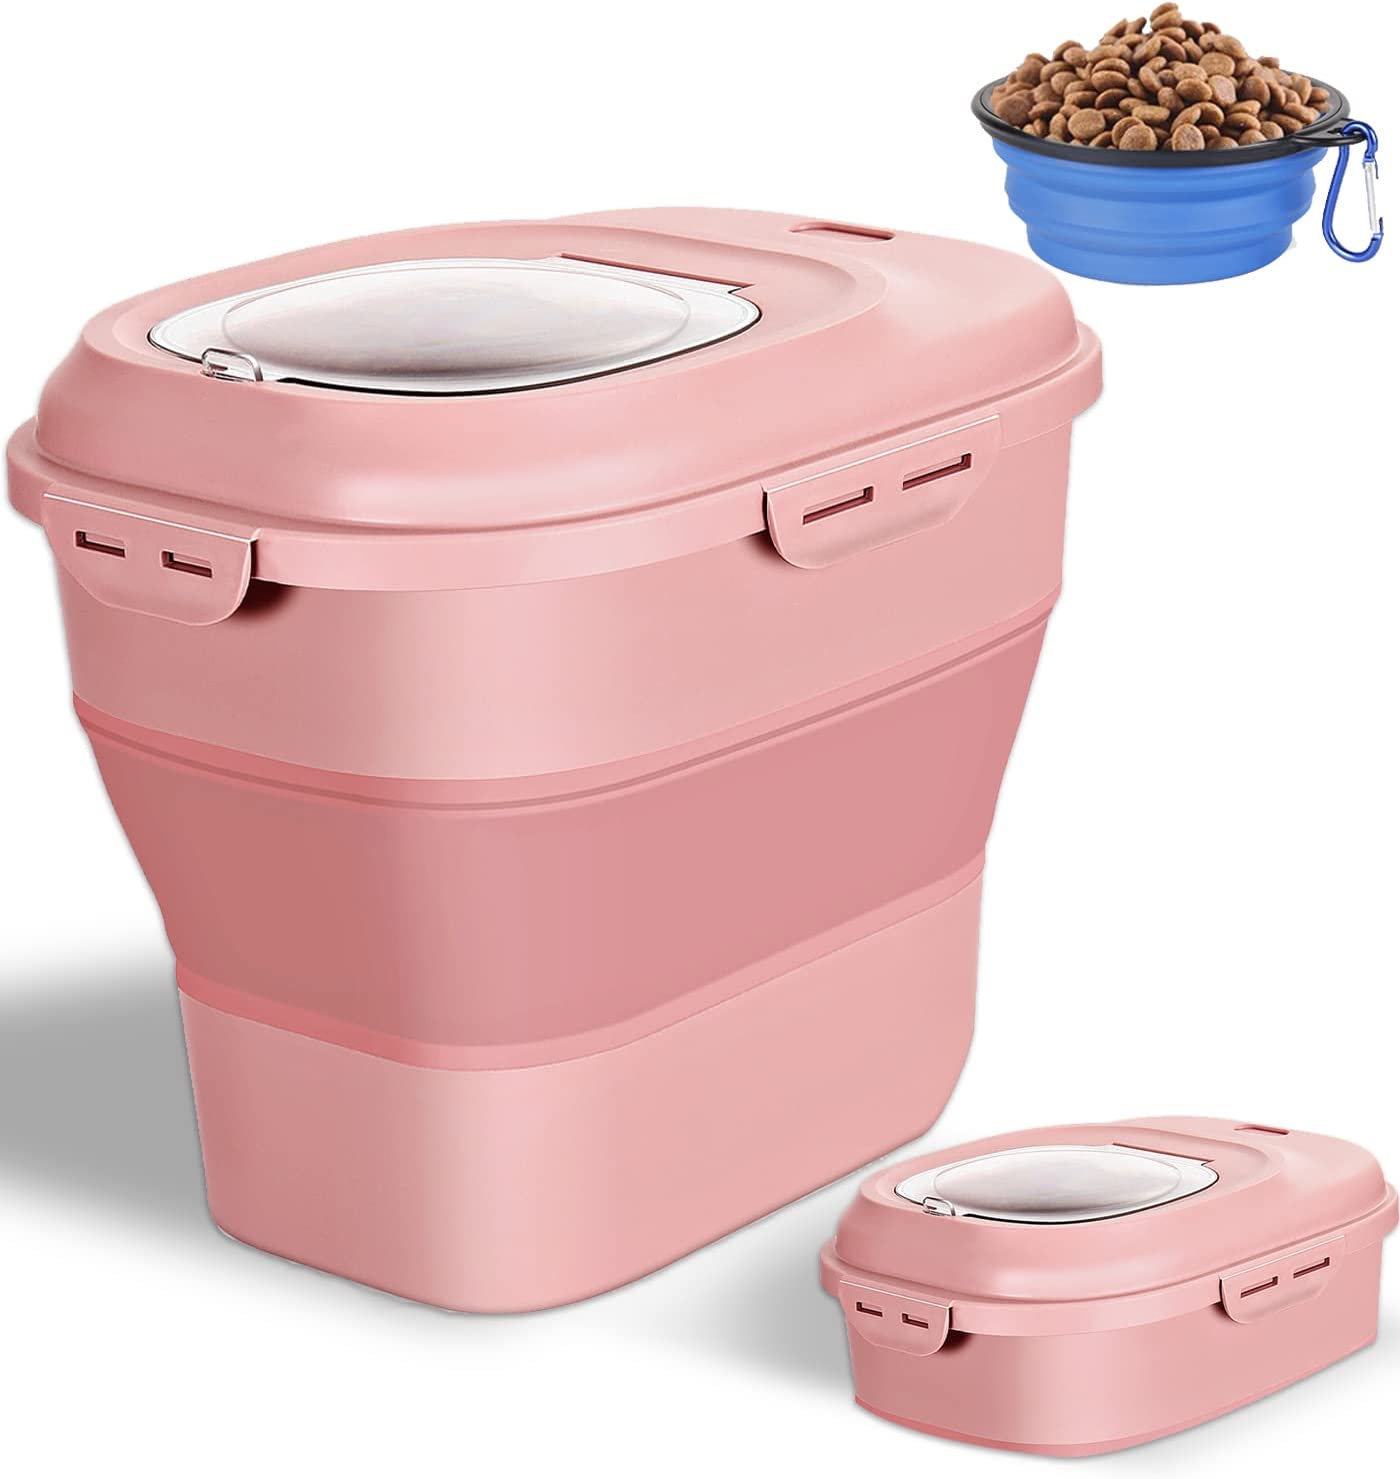 Gropecan Collapsible Pet Food Container